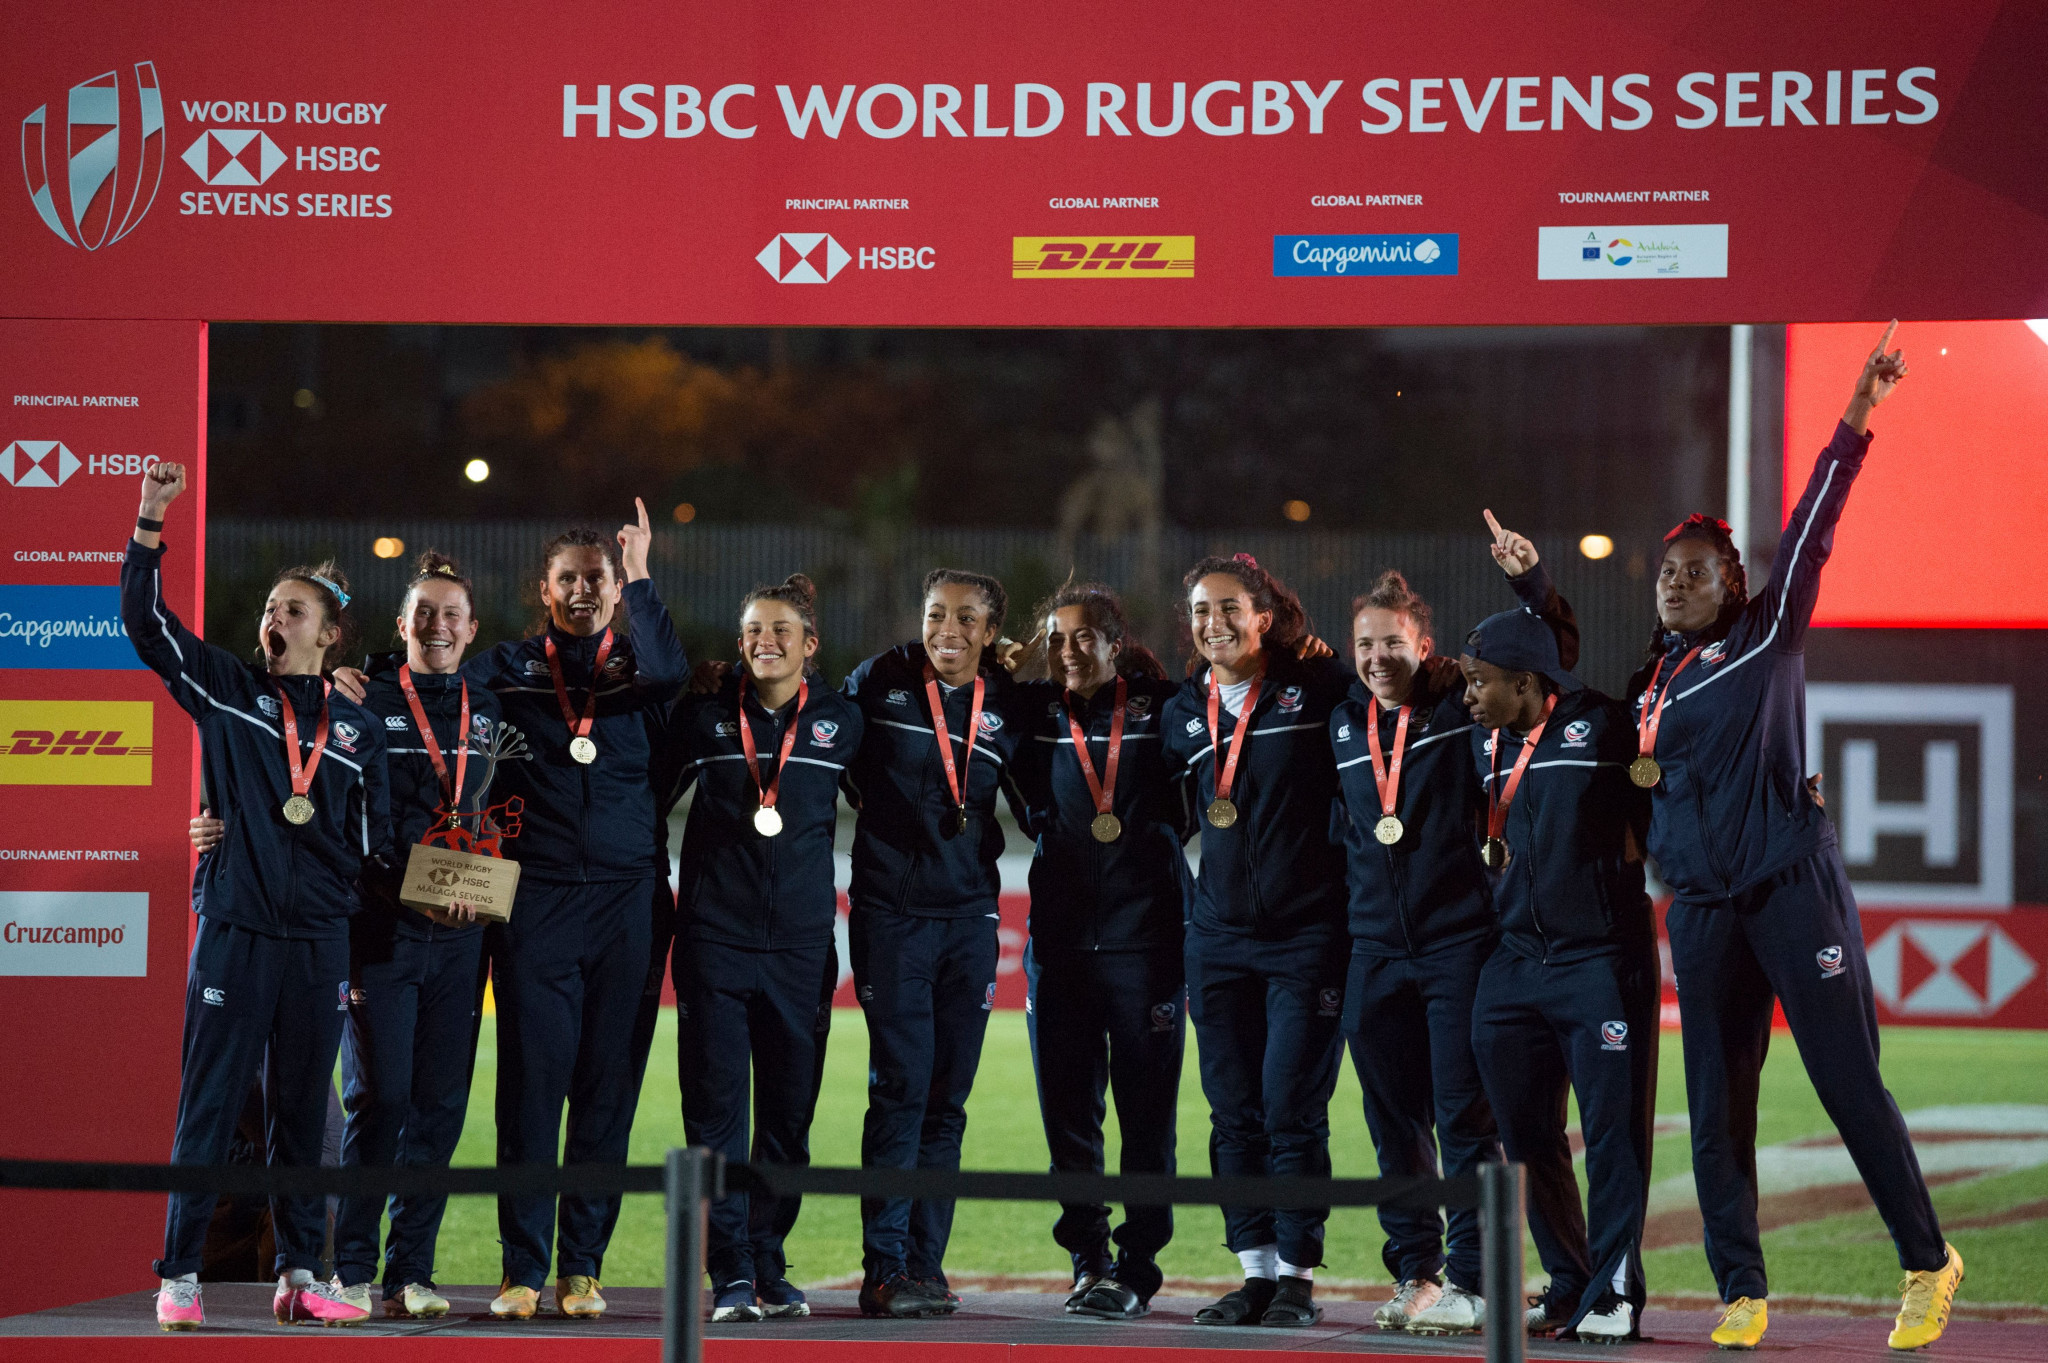 Women's favourites start with two wins at World Rugby Sevens Series tournament in Seville